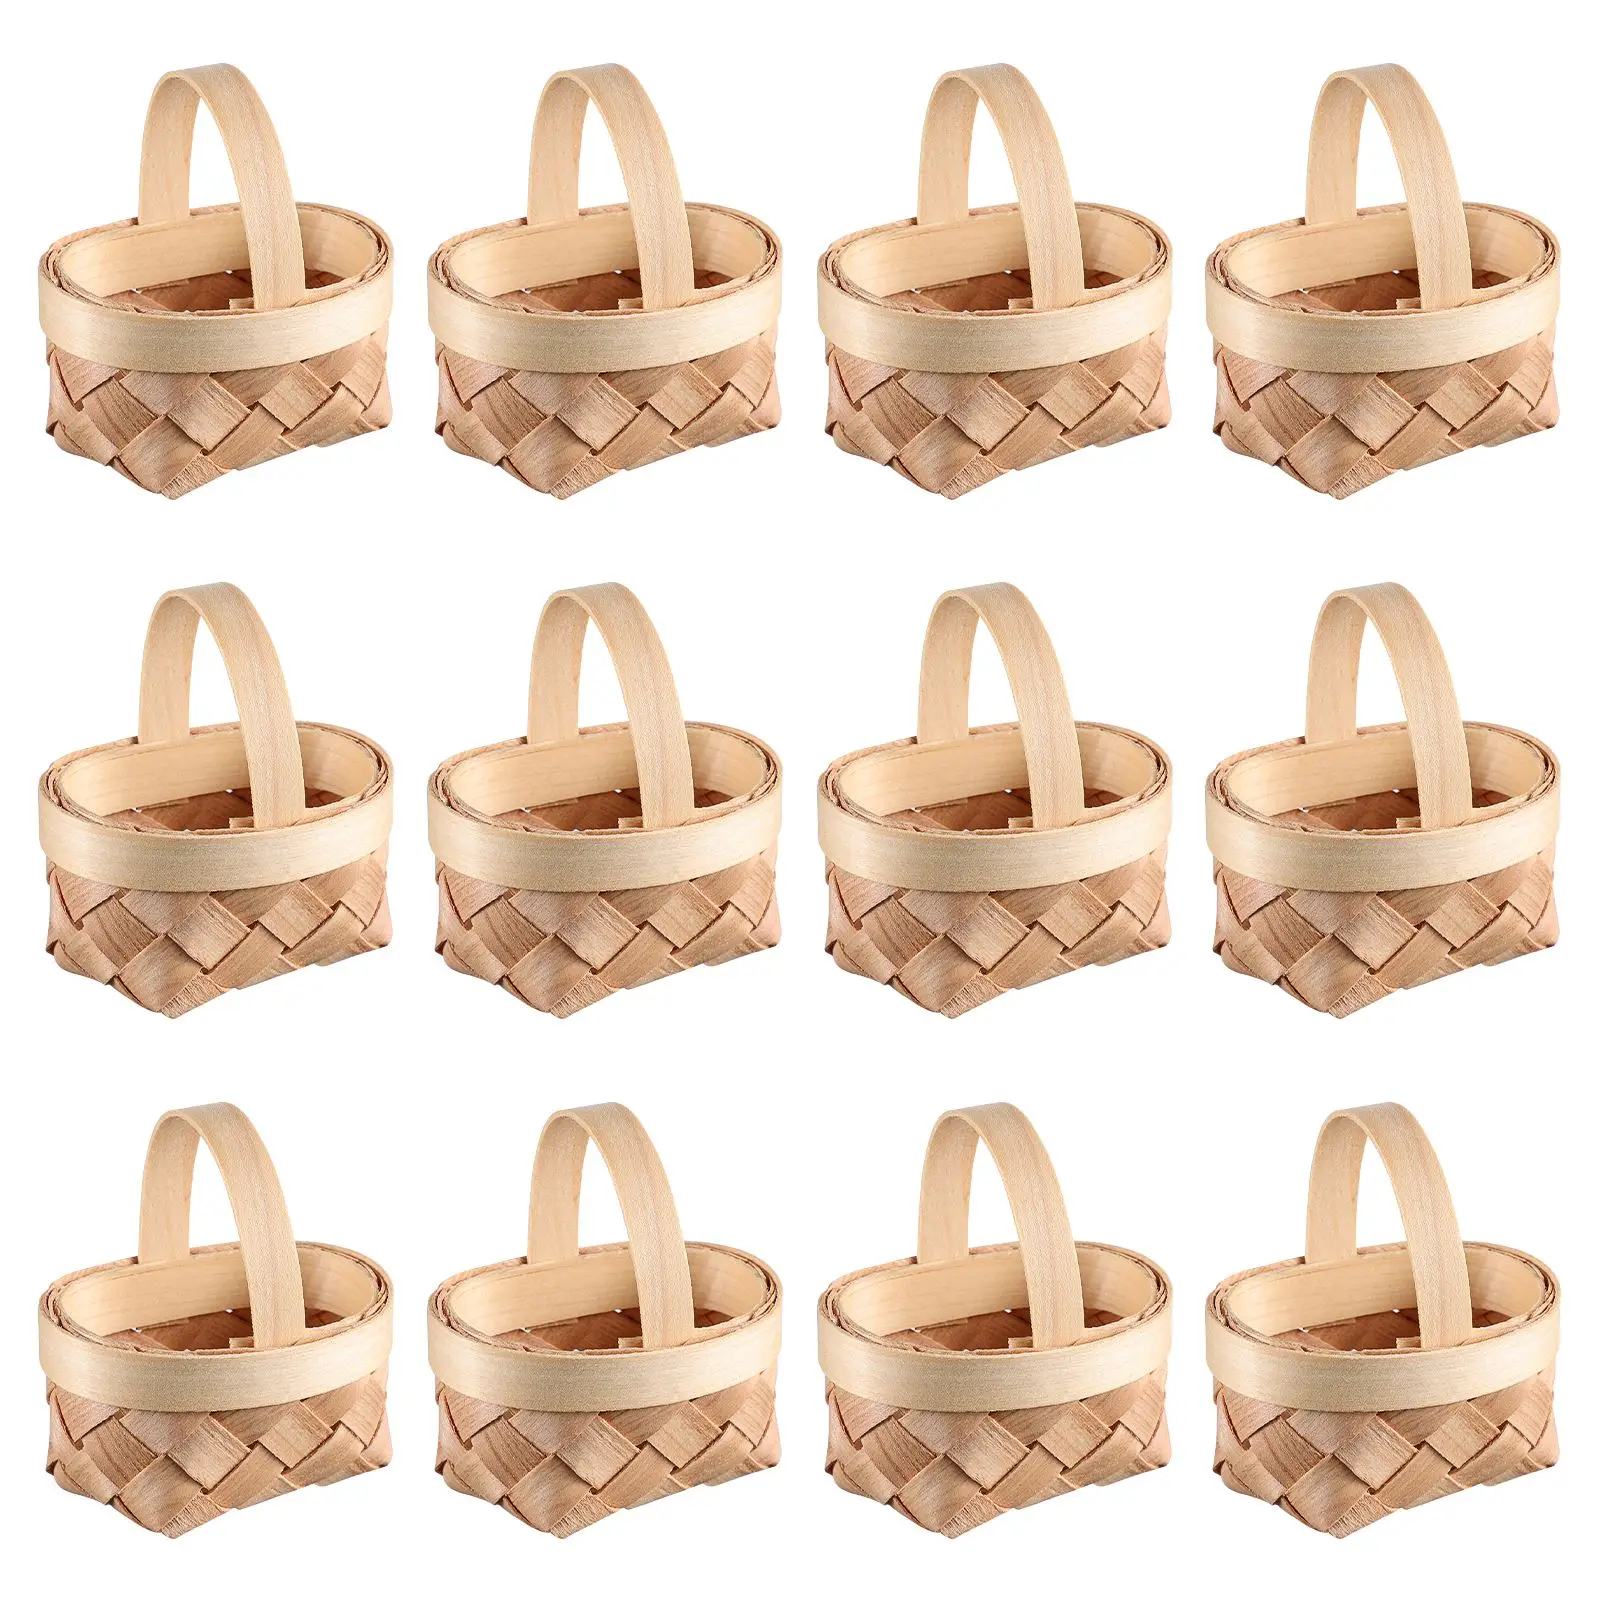 

Basket Mini Baskets Woven Wicker Tiny Chip Easter Candy Gifts Crafts Handle Case Handmade Favors Miniature Craft Favor Wood